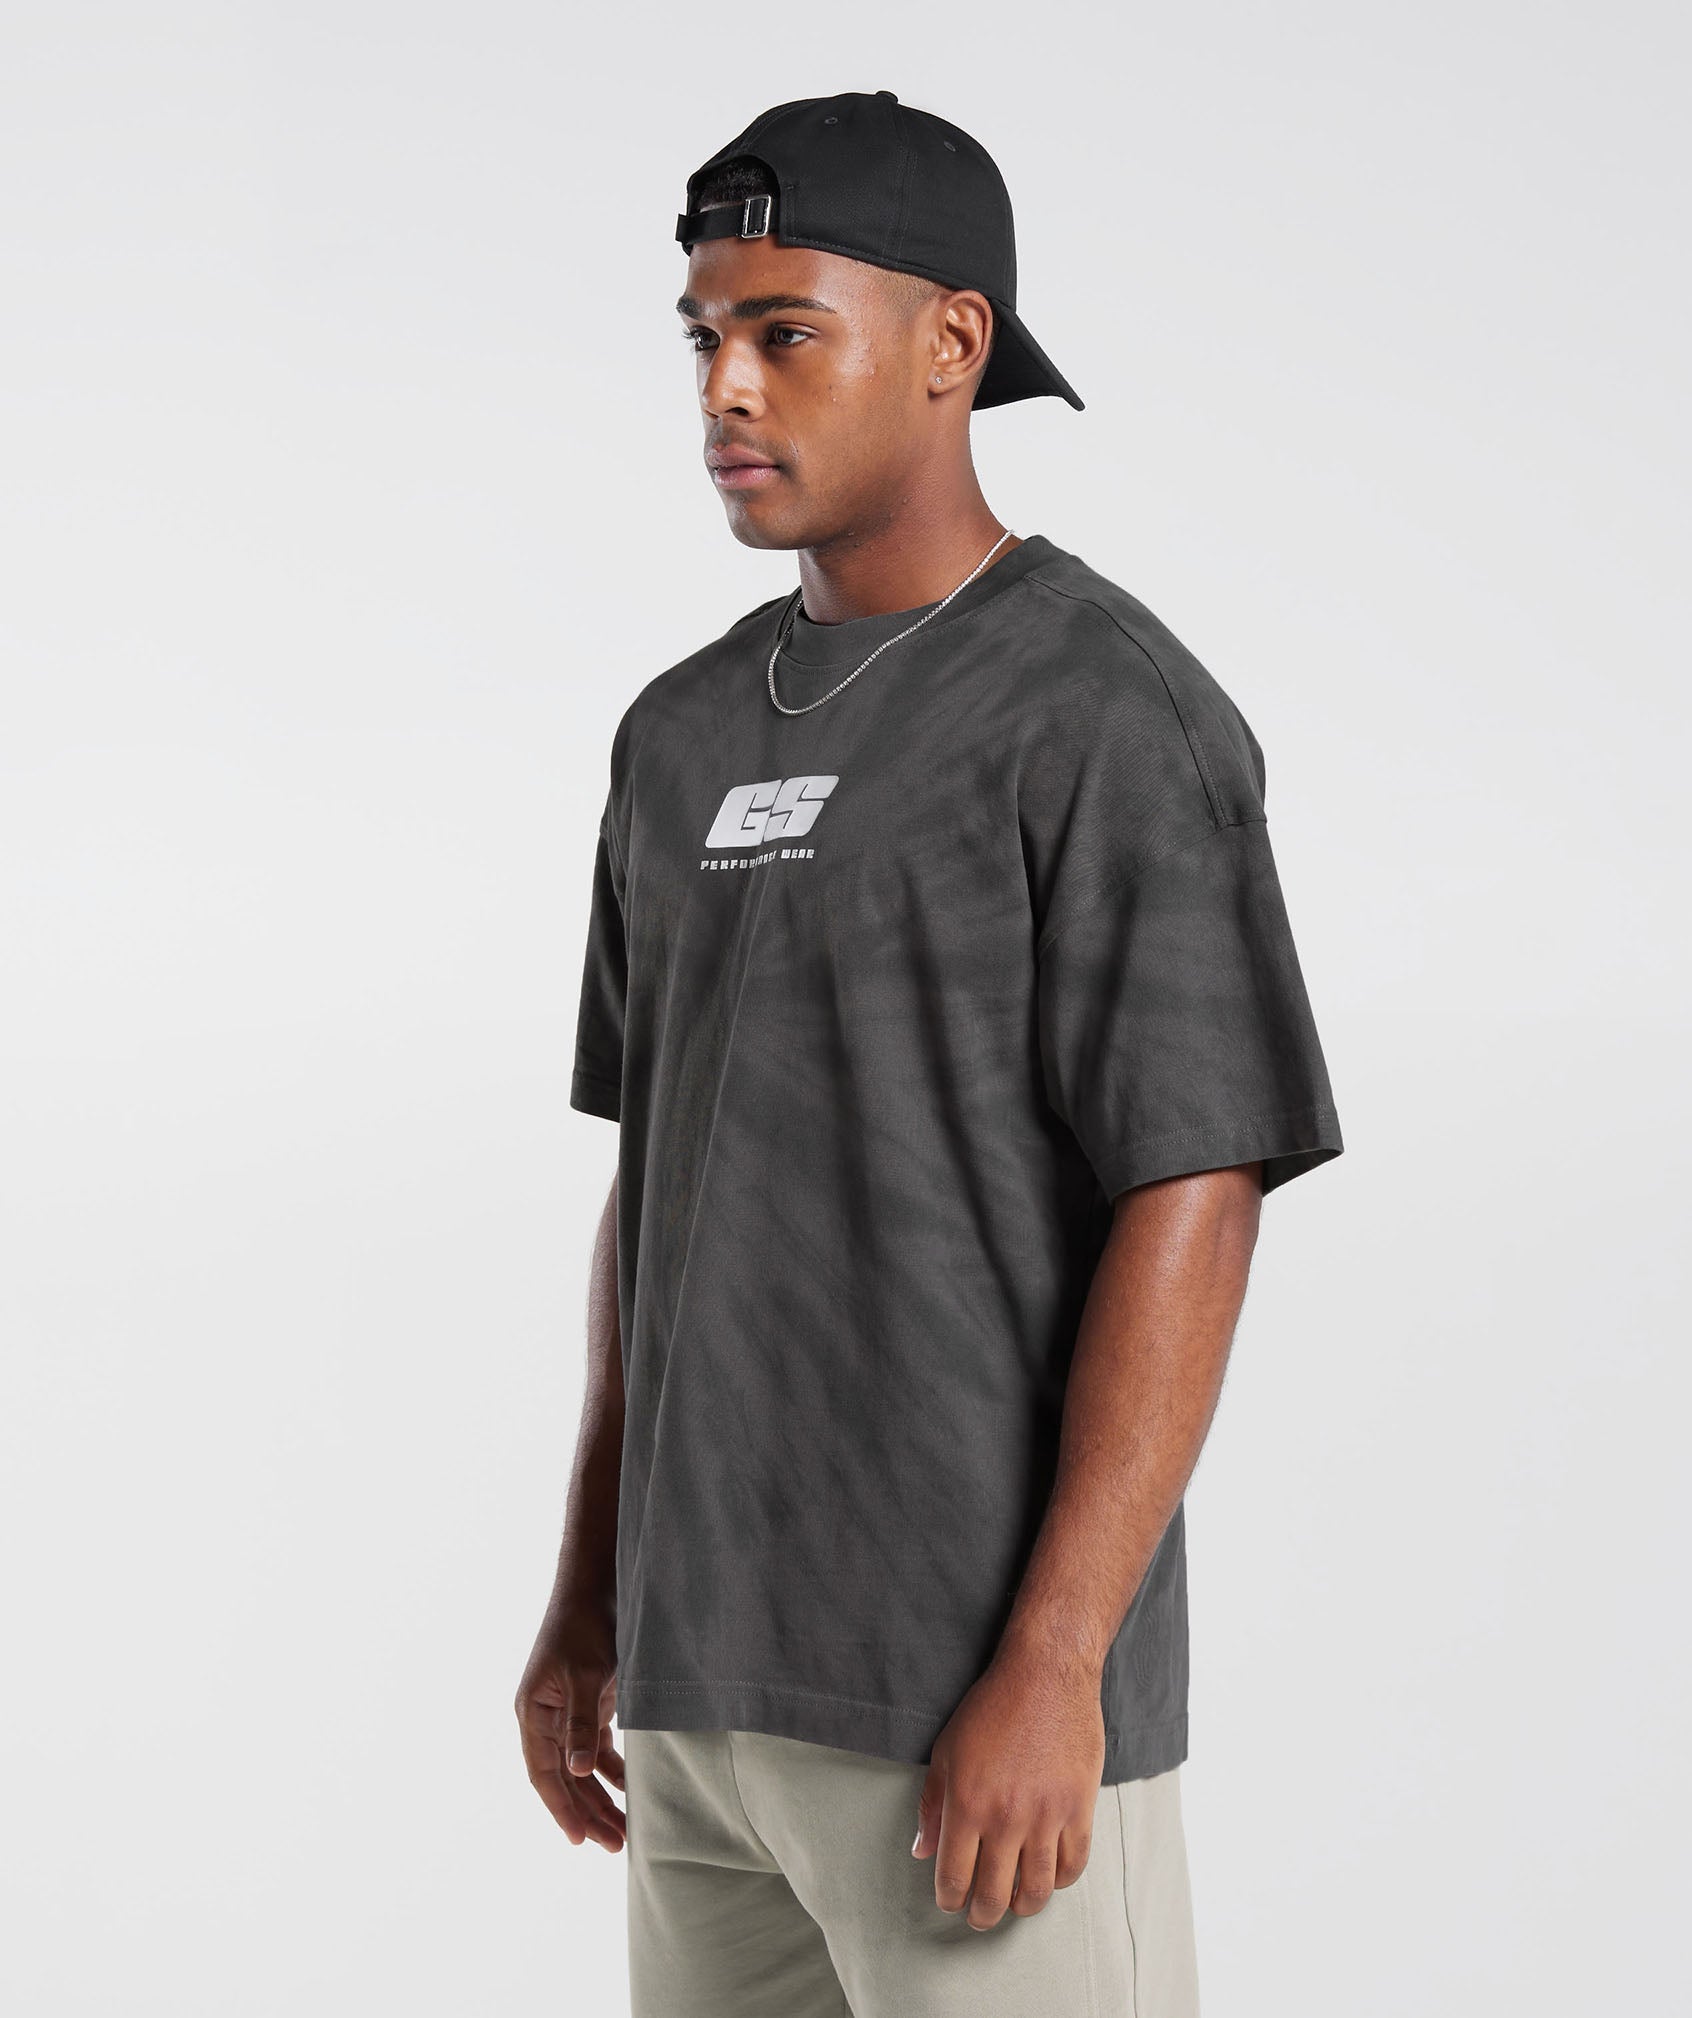 Rest Day T-Shirt in Silhouette Grey/Black/Spiral Optic Wash - view 3